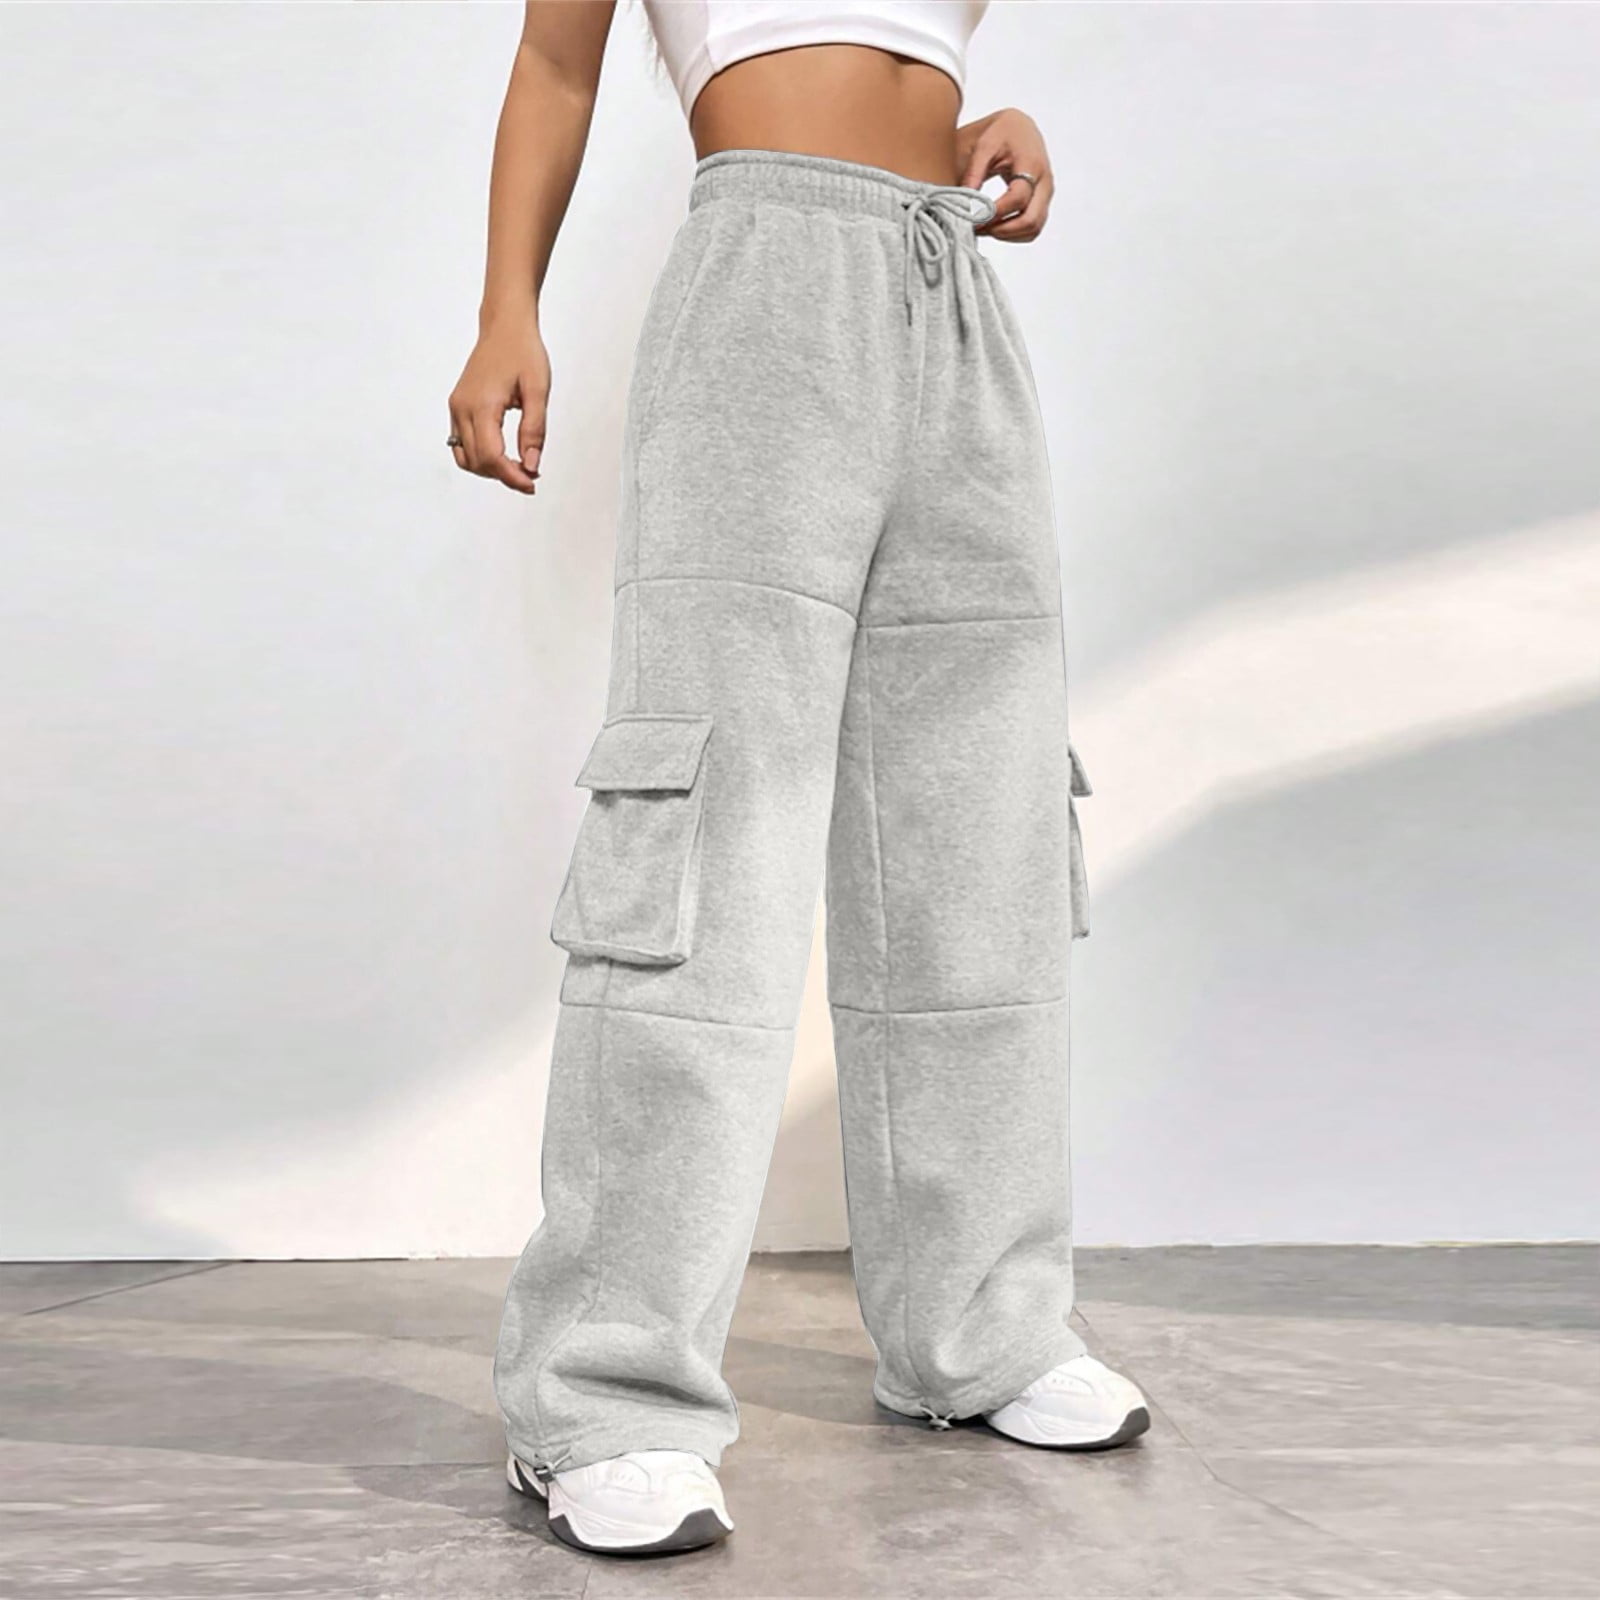 Yskkt High Waist Cargo Pants For Women Fashionable Streetwear Sweatpants  With Pocket, Slim Fit, And Elastics Cotton Trousers Women For Spring And  Autumn 210925 From Luo02, $17.93